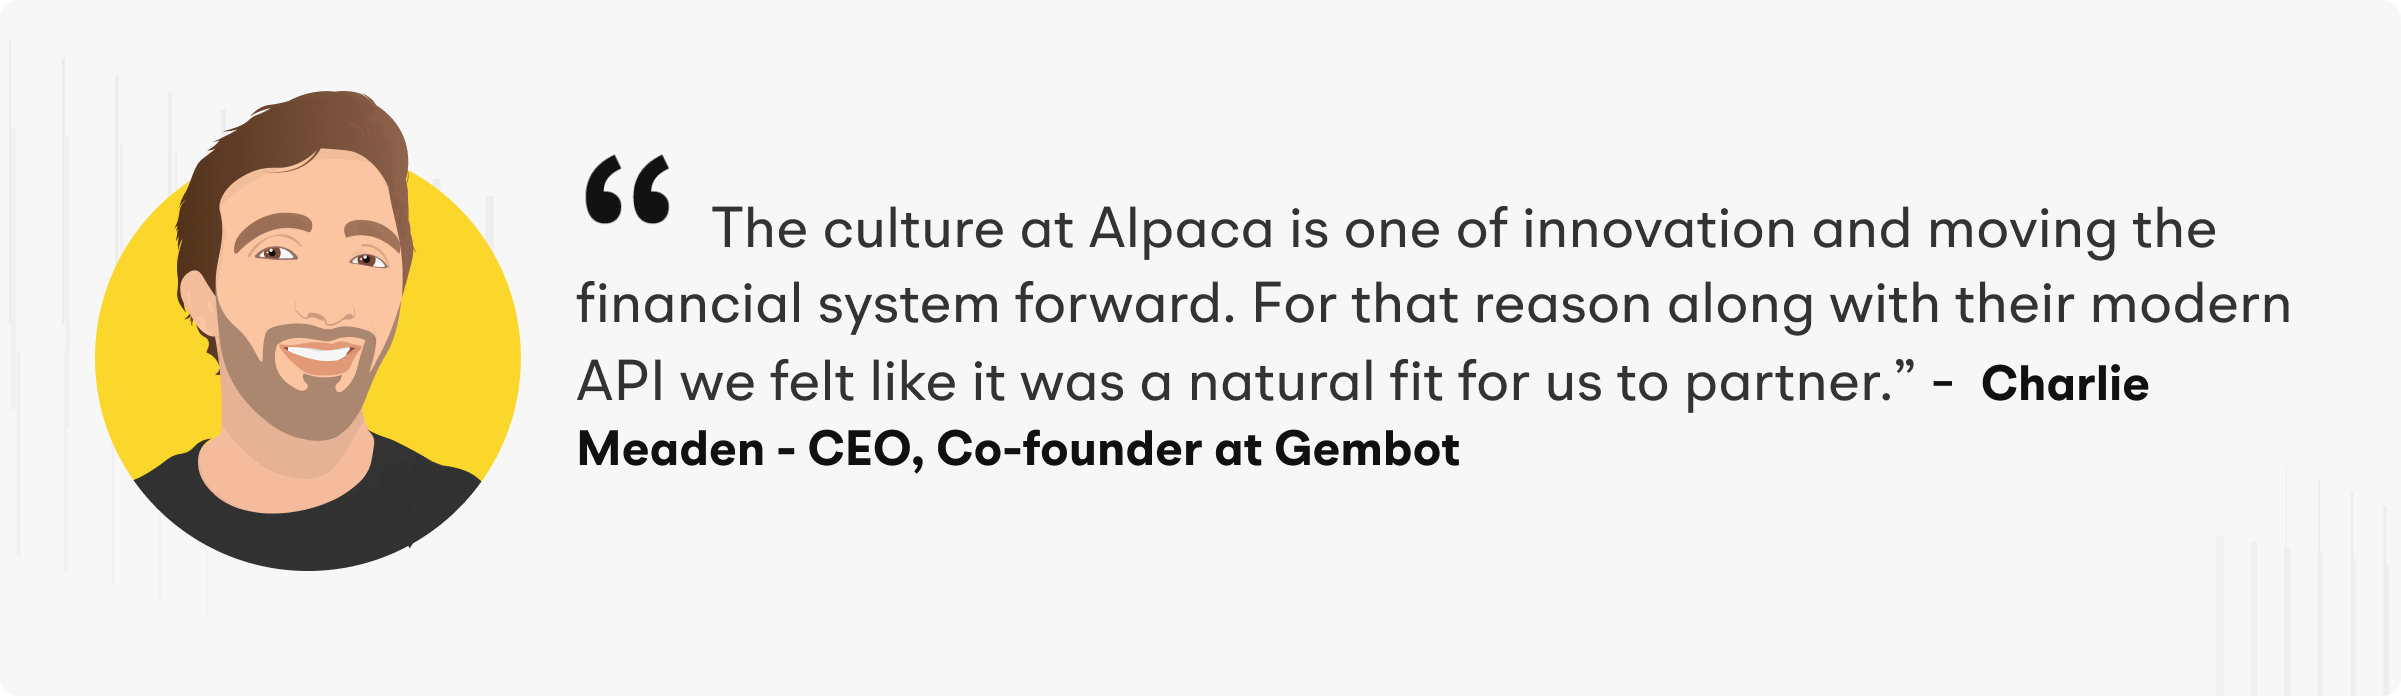 “The culture at Alpaca is one of innovation and moving the financial system forward. For that reason along with their modern API we felt like it was a natural fit for us to partner.”